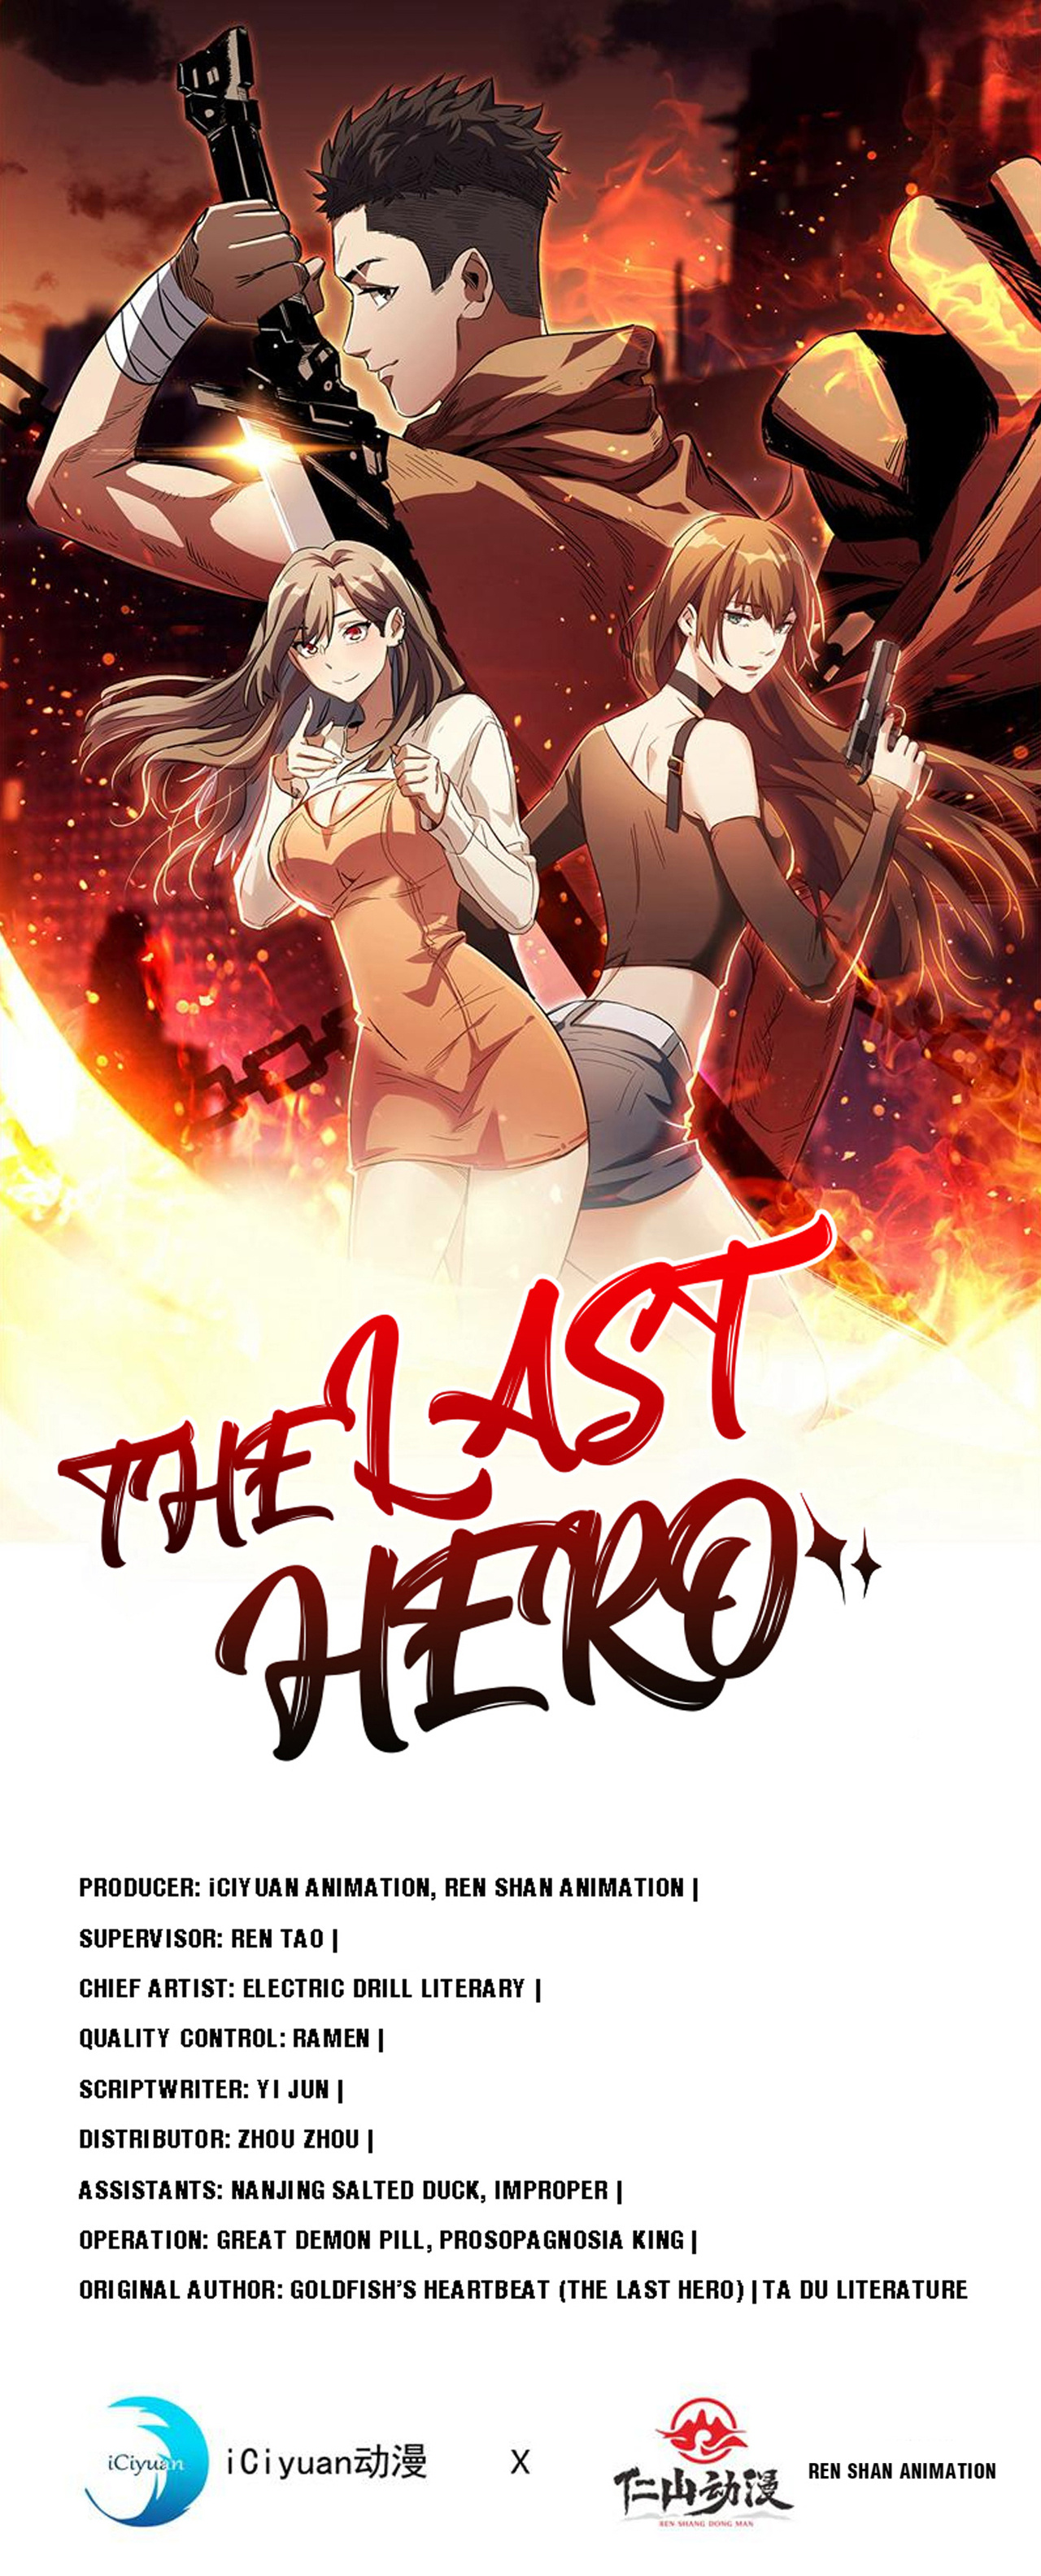 The Last Hero, I Am Picking up Attributes and Items in Last Days 142